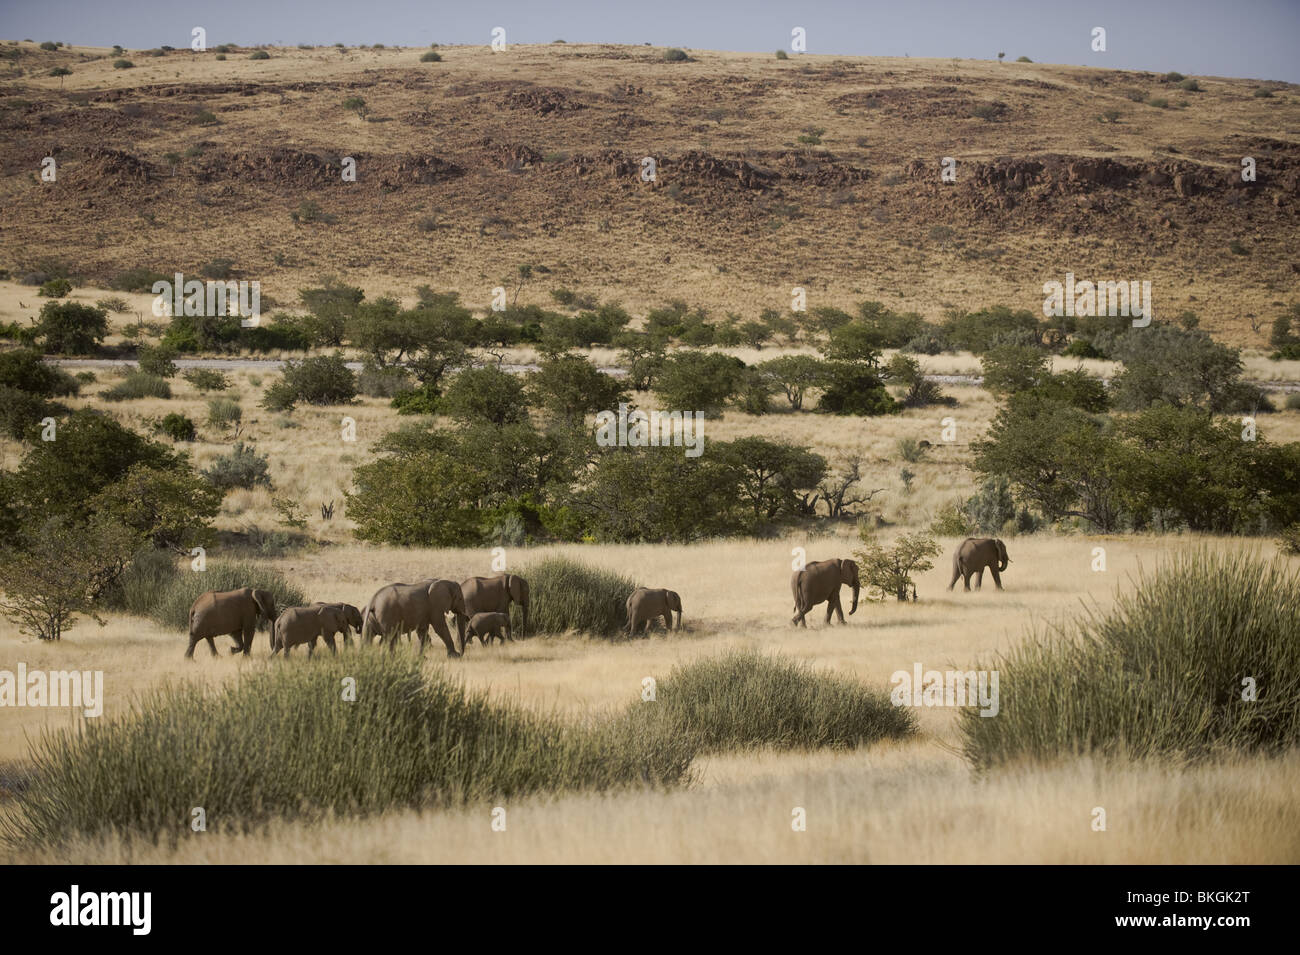 Desert adapted elephants in the Palmwag concession, Kunene region, northern Namibia. Stock Photo